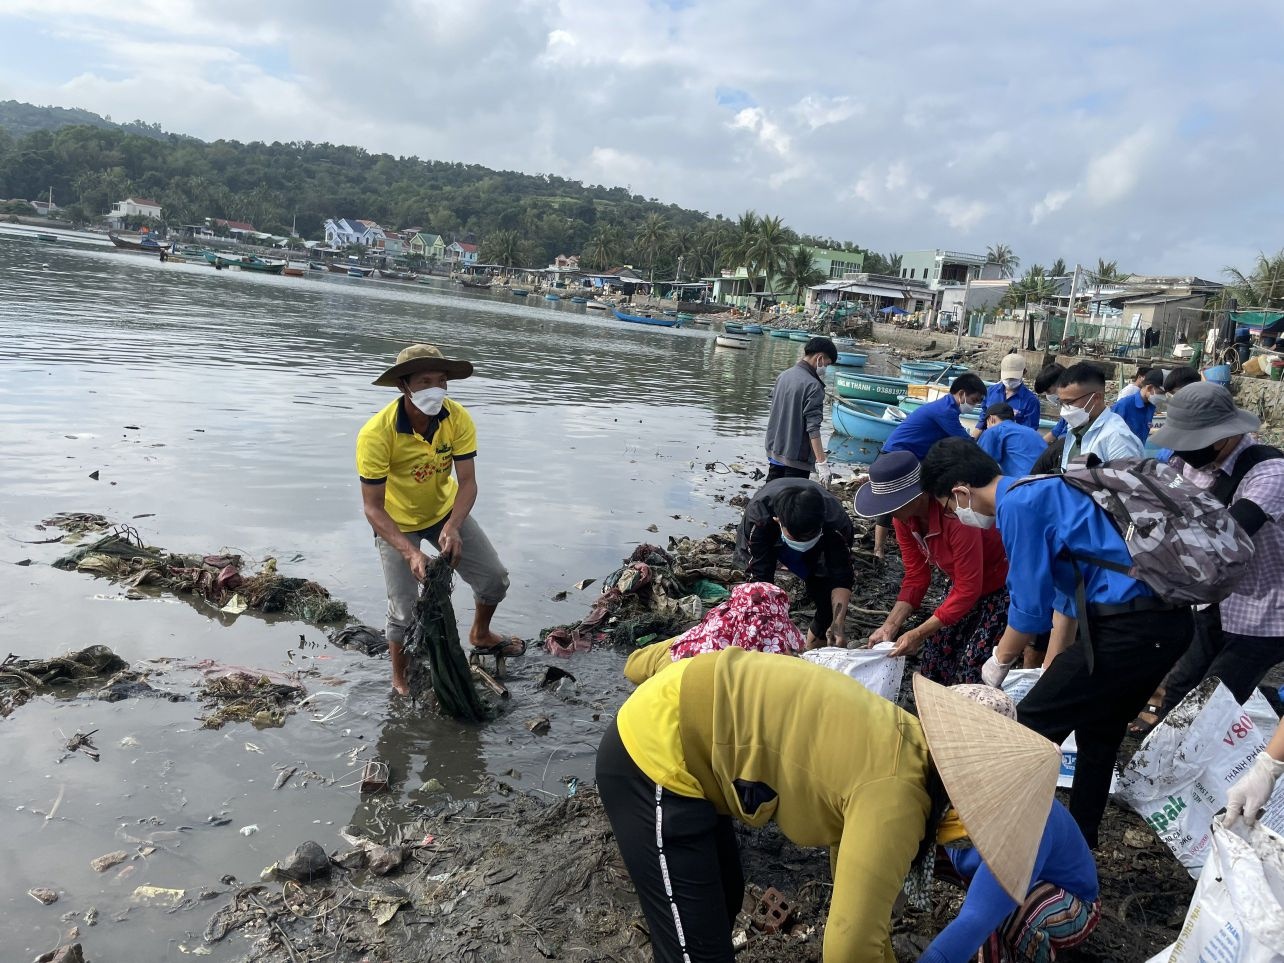 The joint clean-up effort at the beach was a hands-on experience for all volunteers